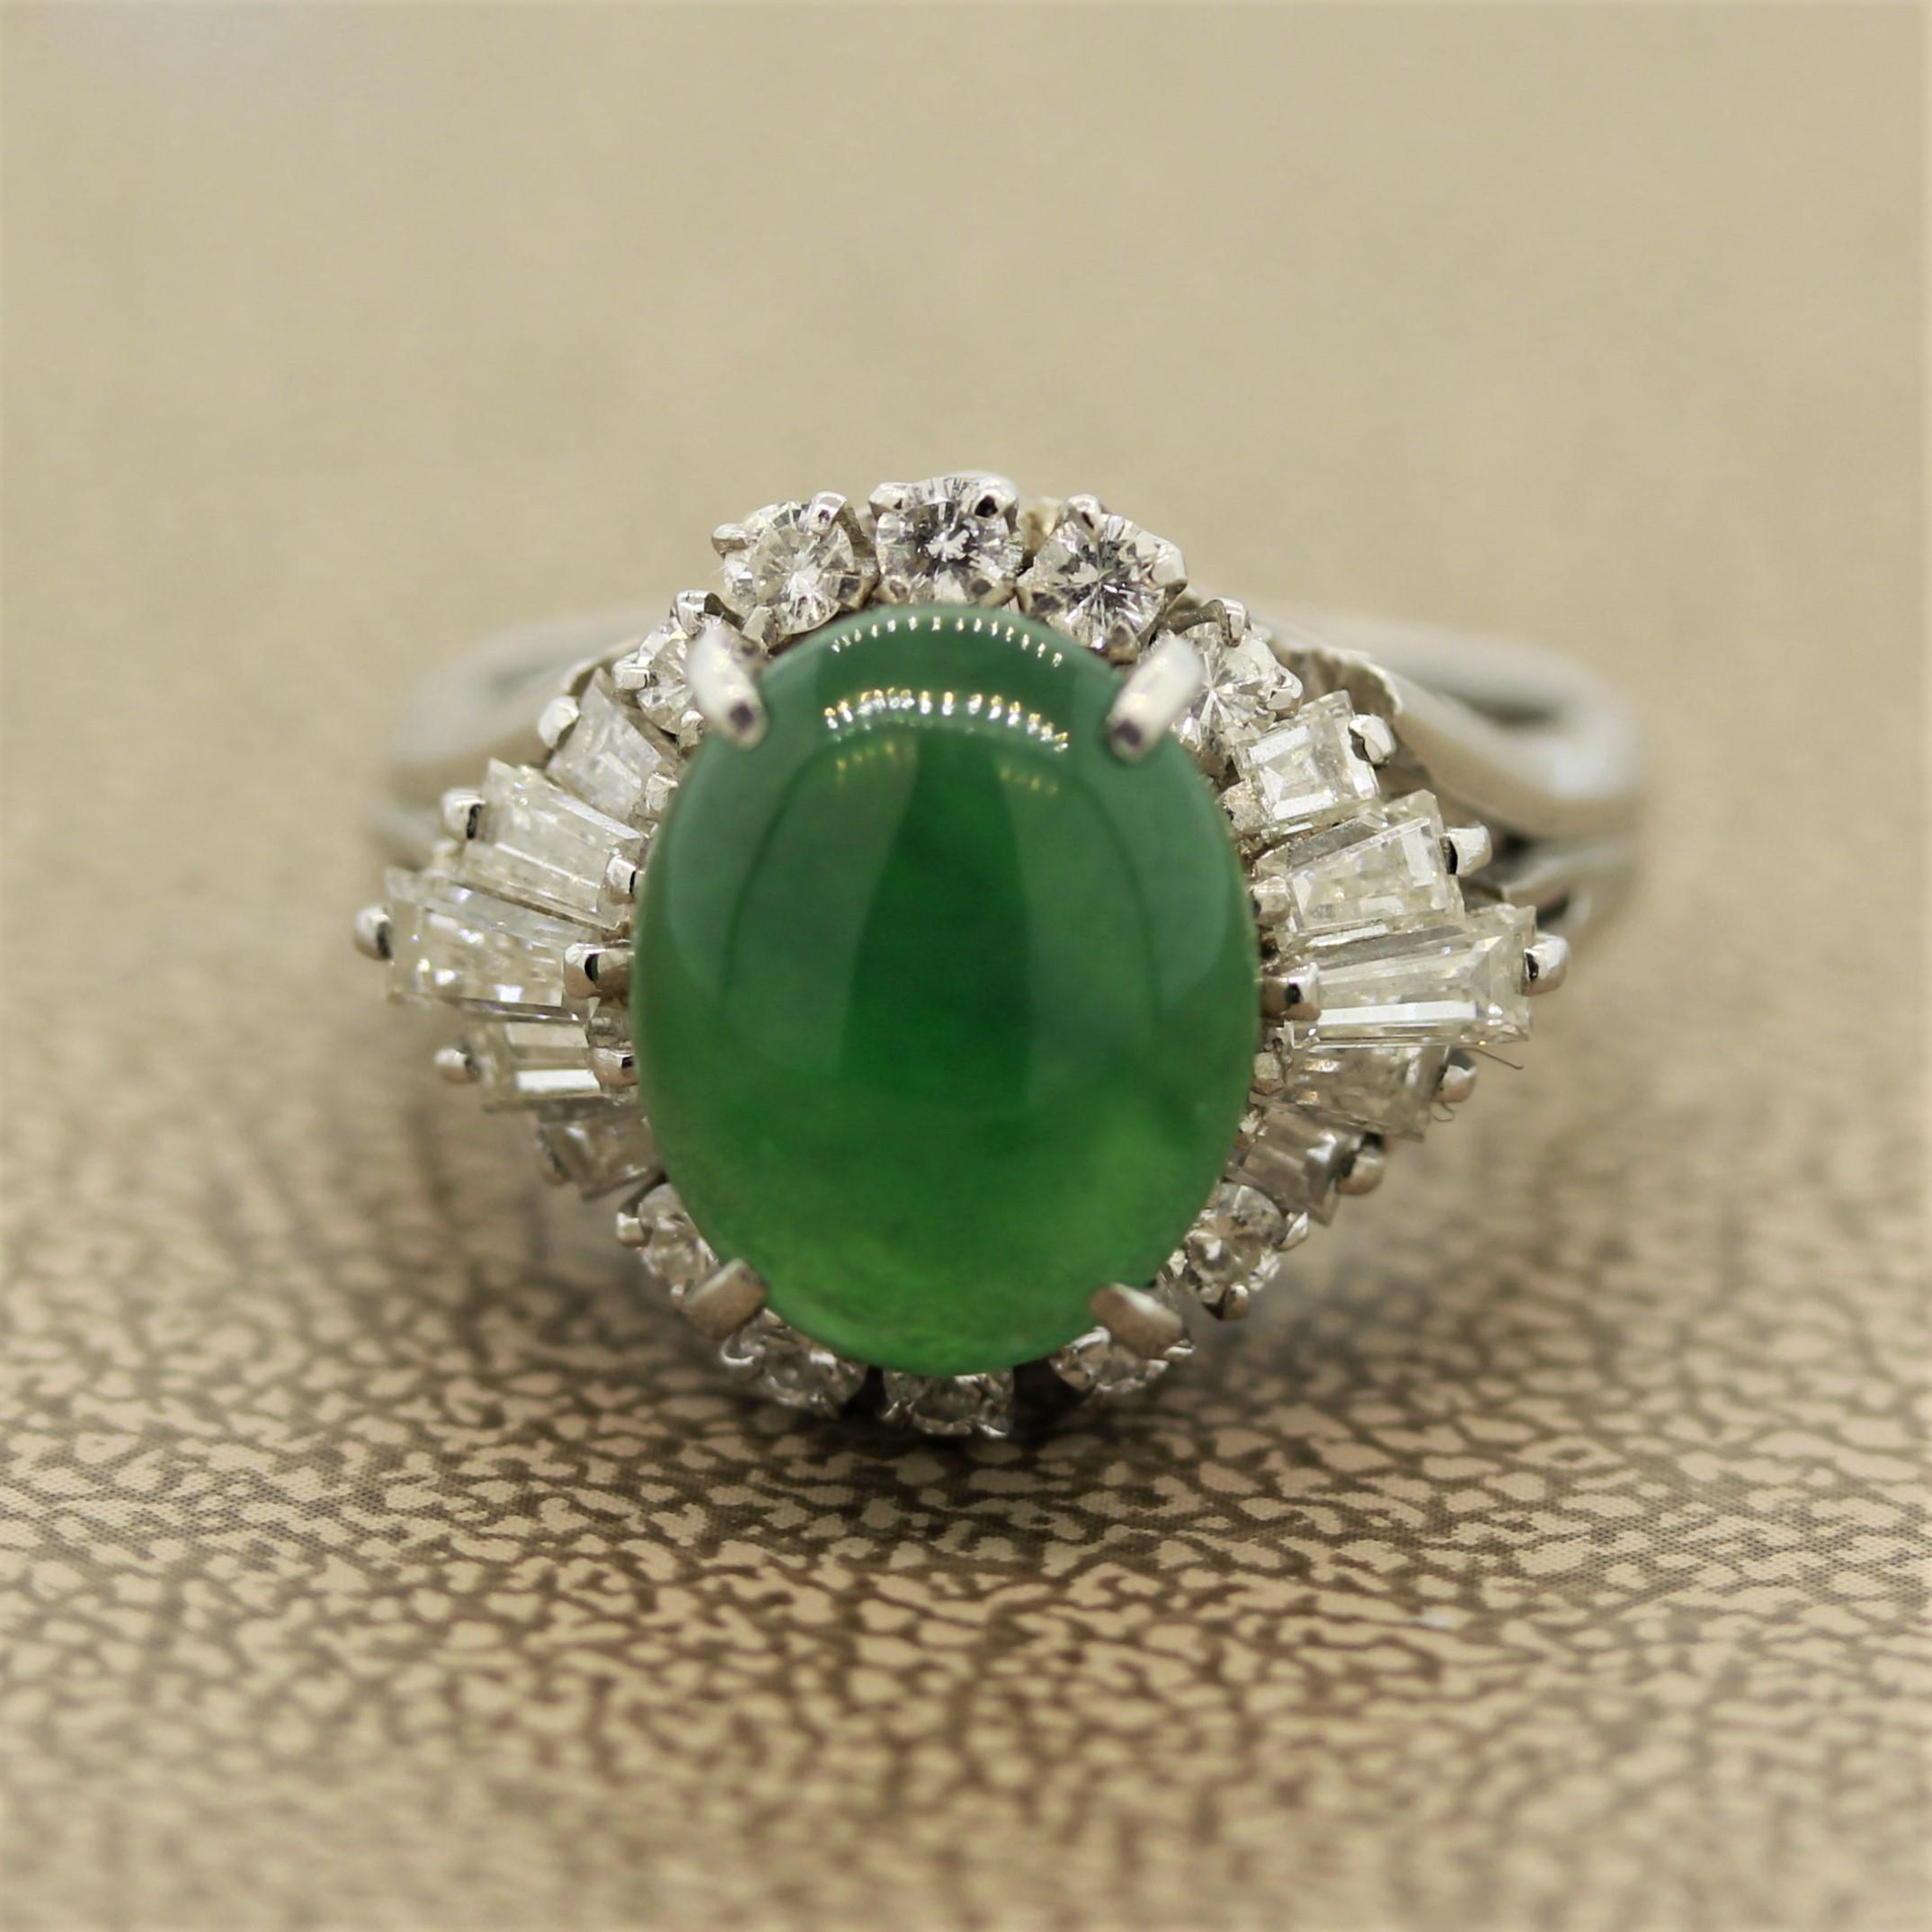 A natural Jadeite Jade ring set in a hand fabricated platinum mounting. The jade weighs approximately 3 carats and has a bright apple green color that is semi-translucent which makes the stone appear to glow. It is accented by 0.80 carats of round